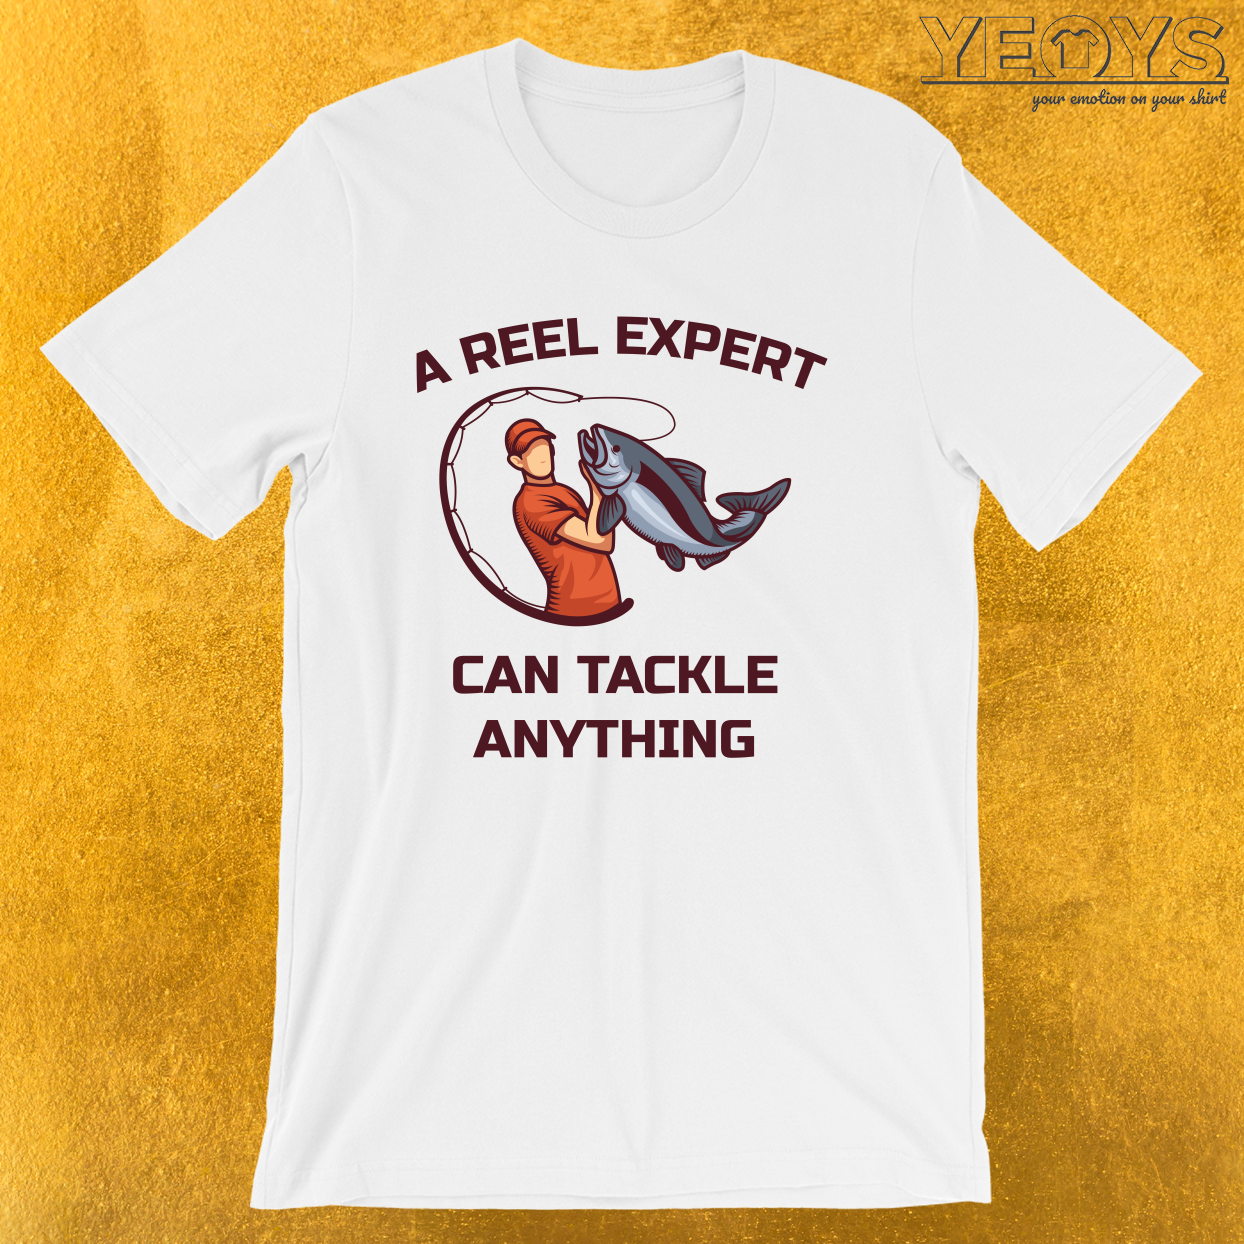 A Reel Expert Can Tackle Anything – Funny Fishing Tee